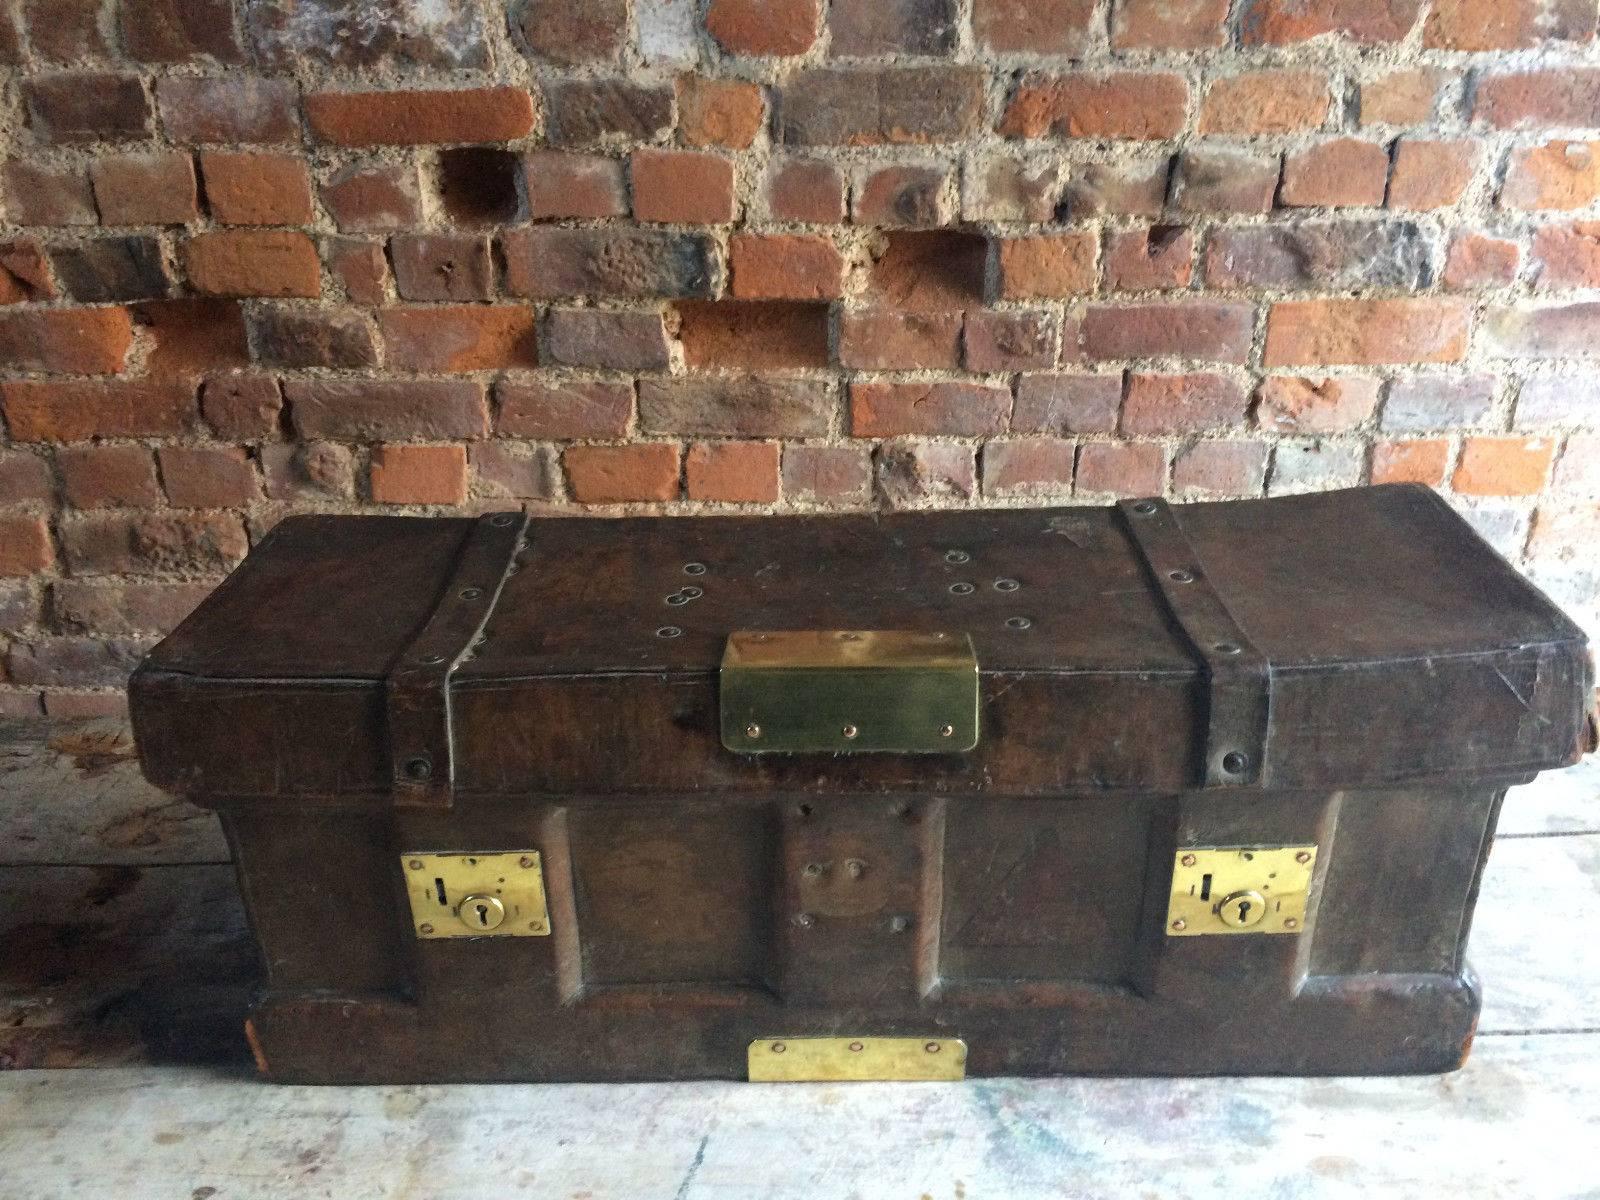 A beautiful, rare and original antique 19th century United States stagecoach leather strong box, with brass mounts and locks and with securing chains at the back, stencilled and embossed numbers, look amazing.